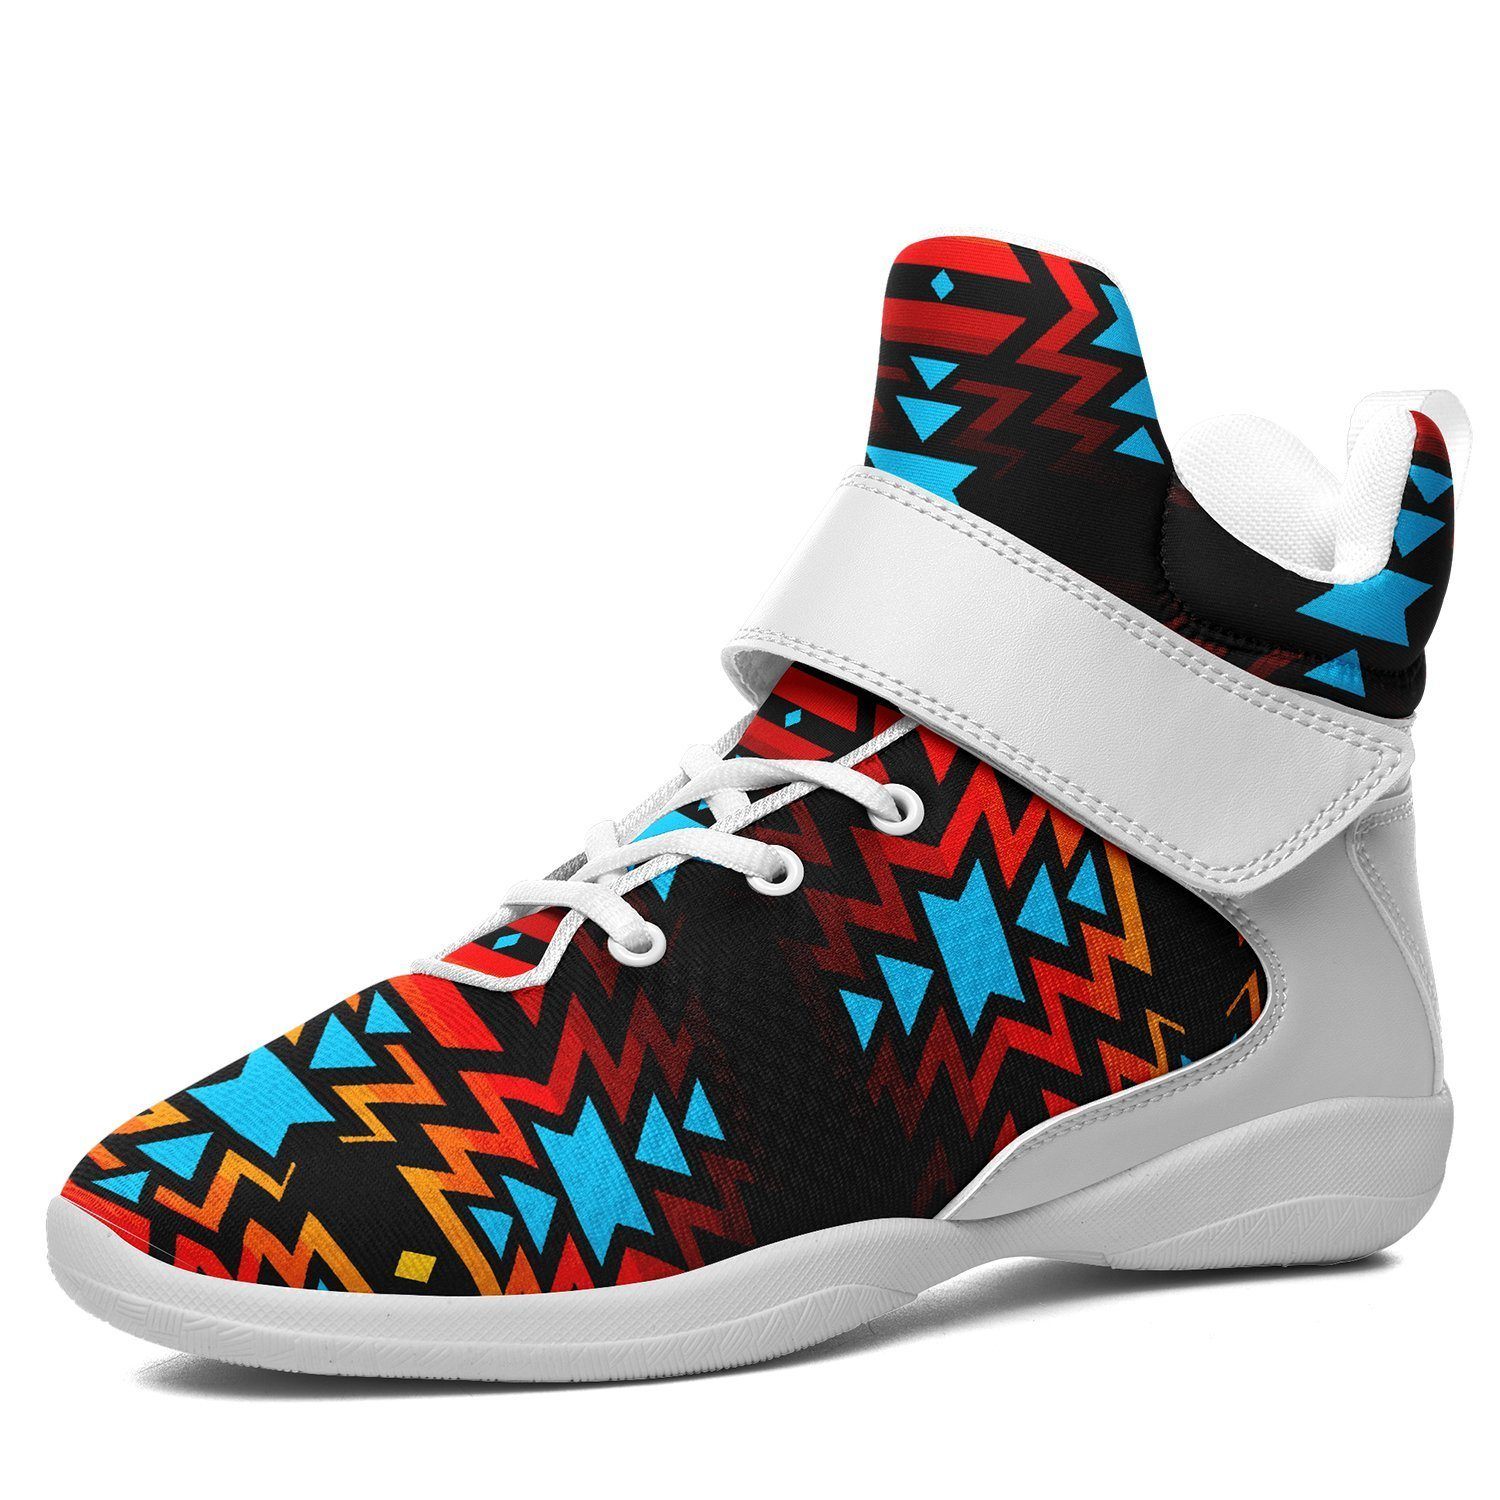 Black Fire and Turquoise Ipottaa Basketball / Sport High Top Shoes - White Sole 49 Dzine US Men 7 / EUR 40 White Sole with White Strap 